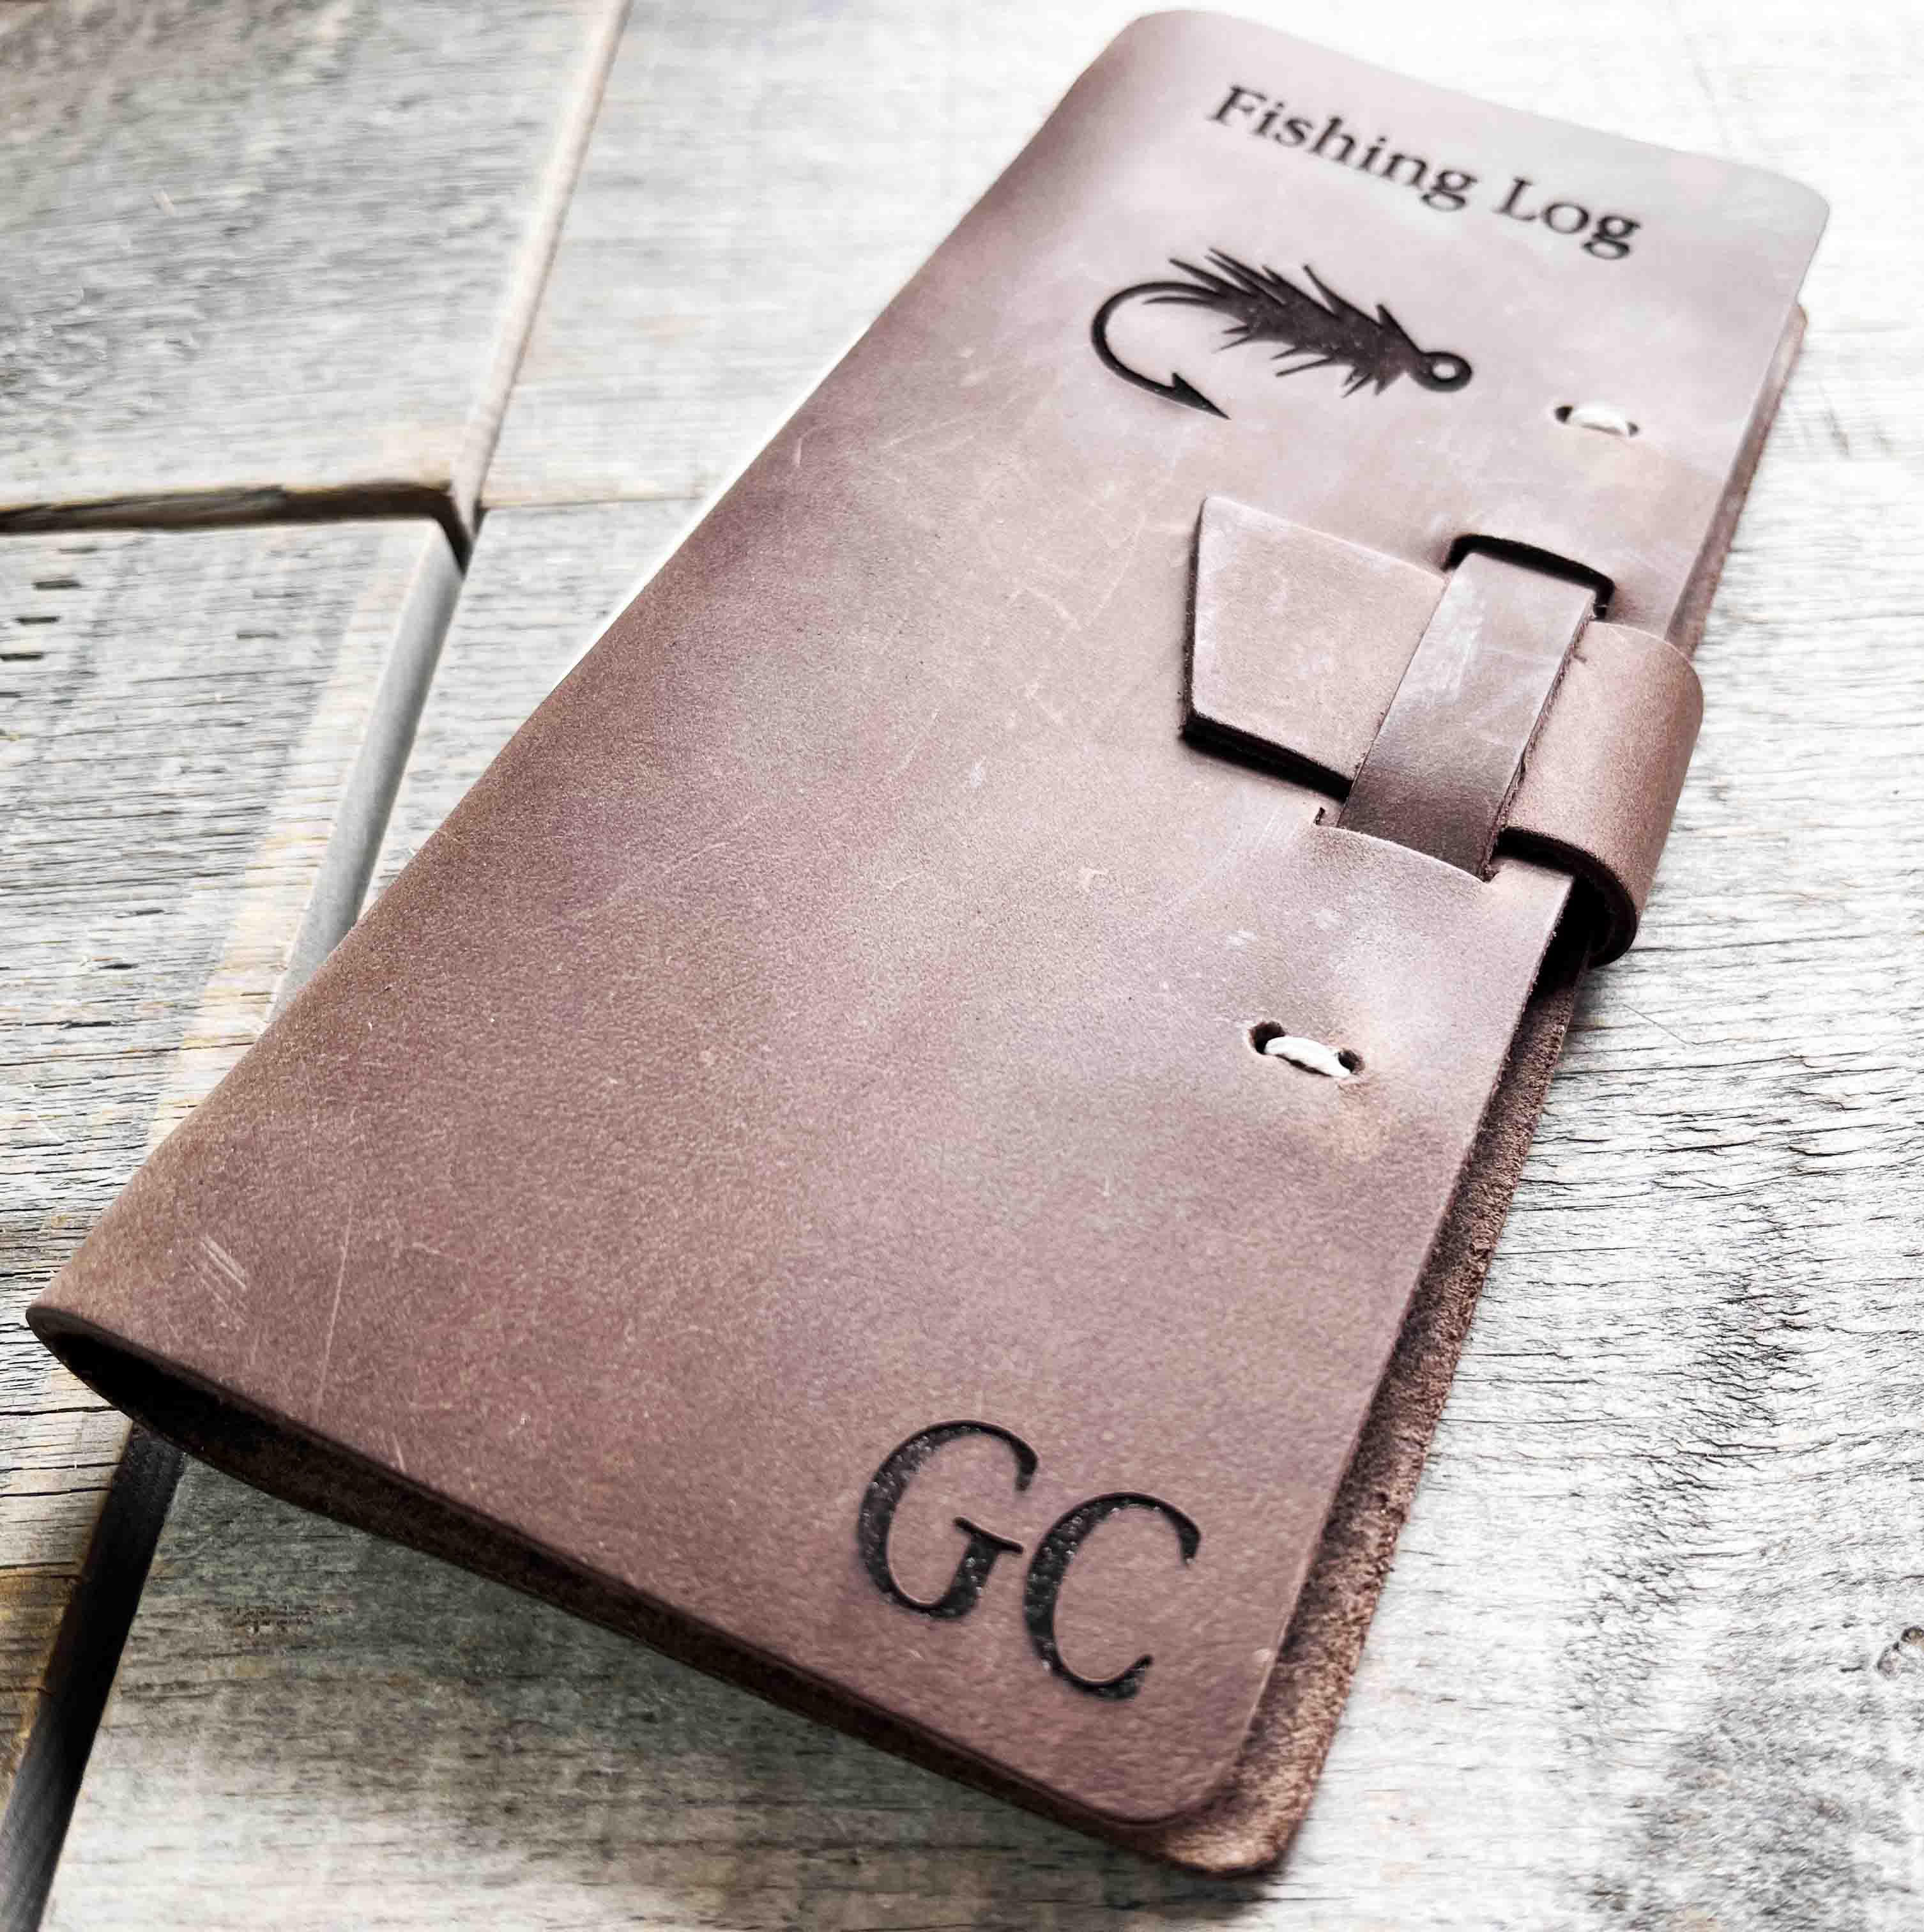 Fishing Log Book for Kids Personalized Fishing Log Book Fishing Diary  Fisherman's Notebook Angler's Journal Fisherman Best Gift -  Canada